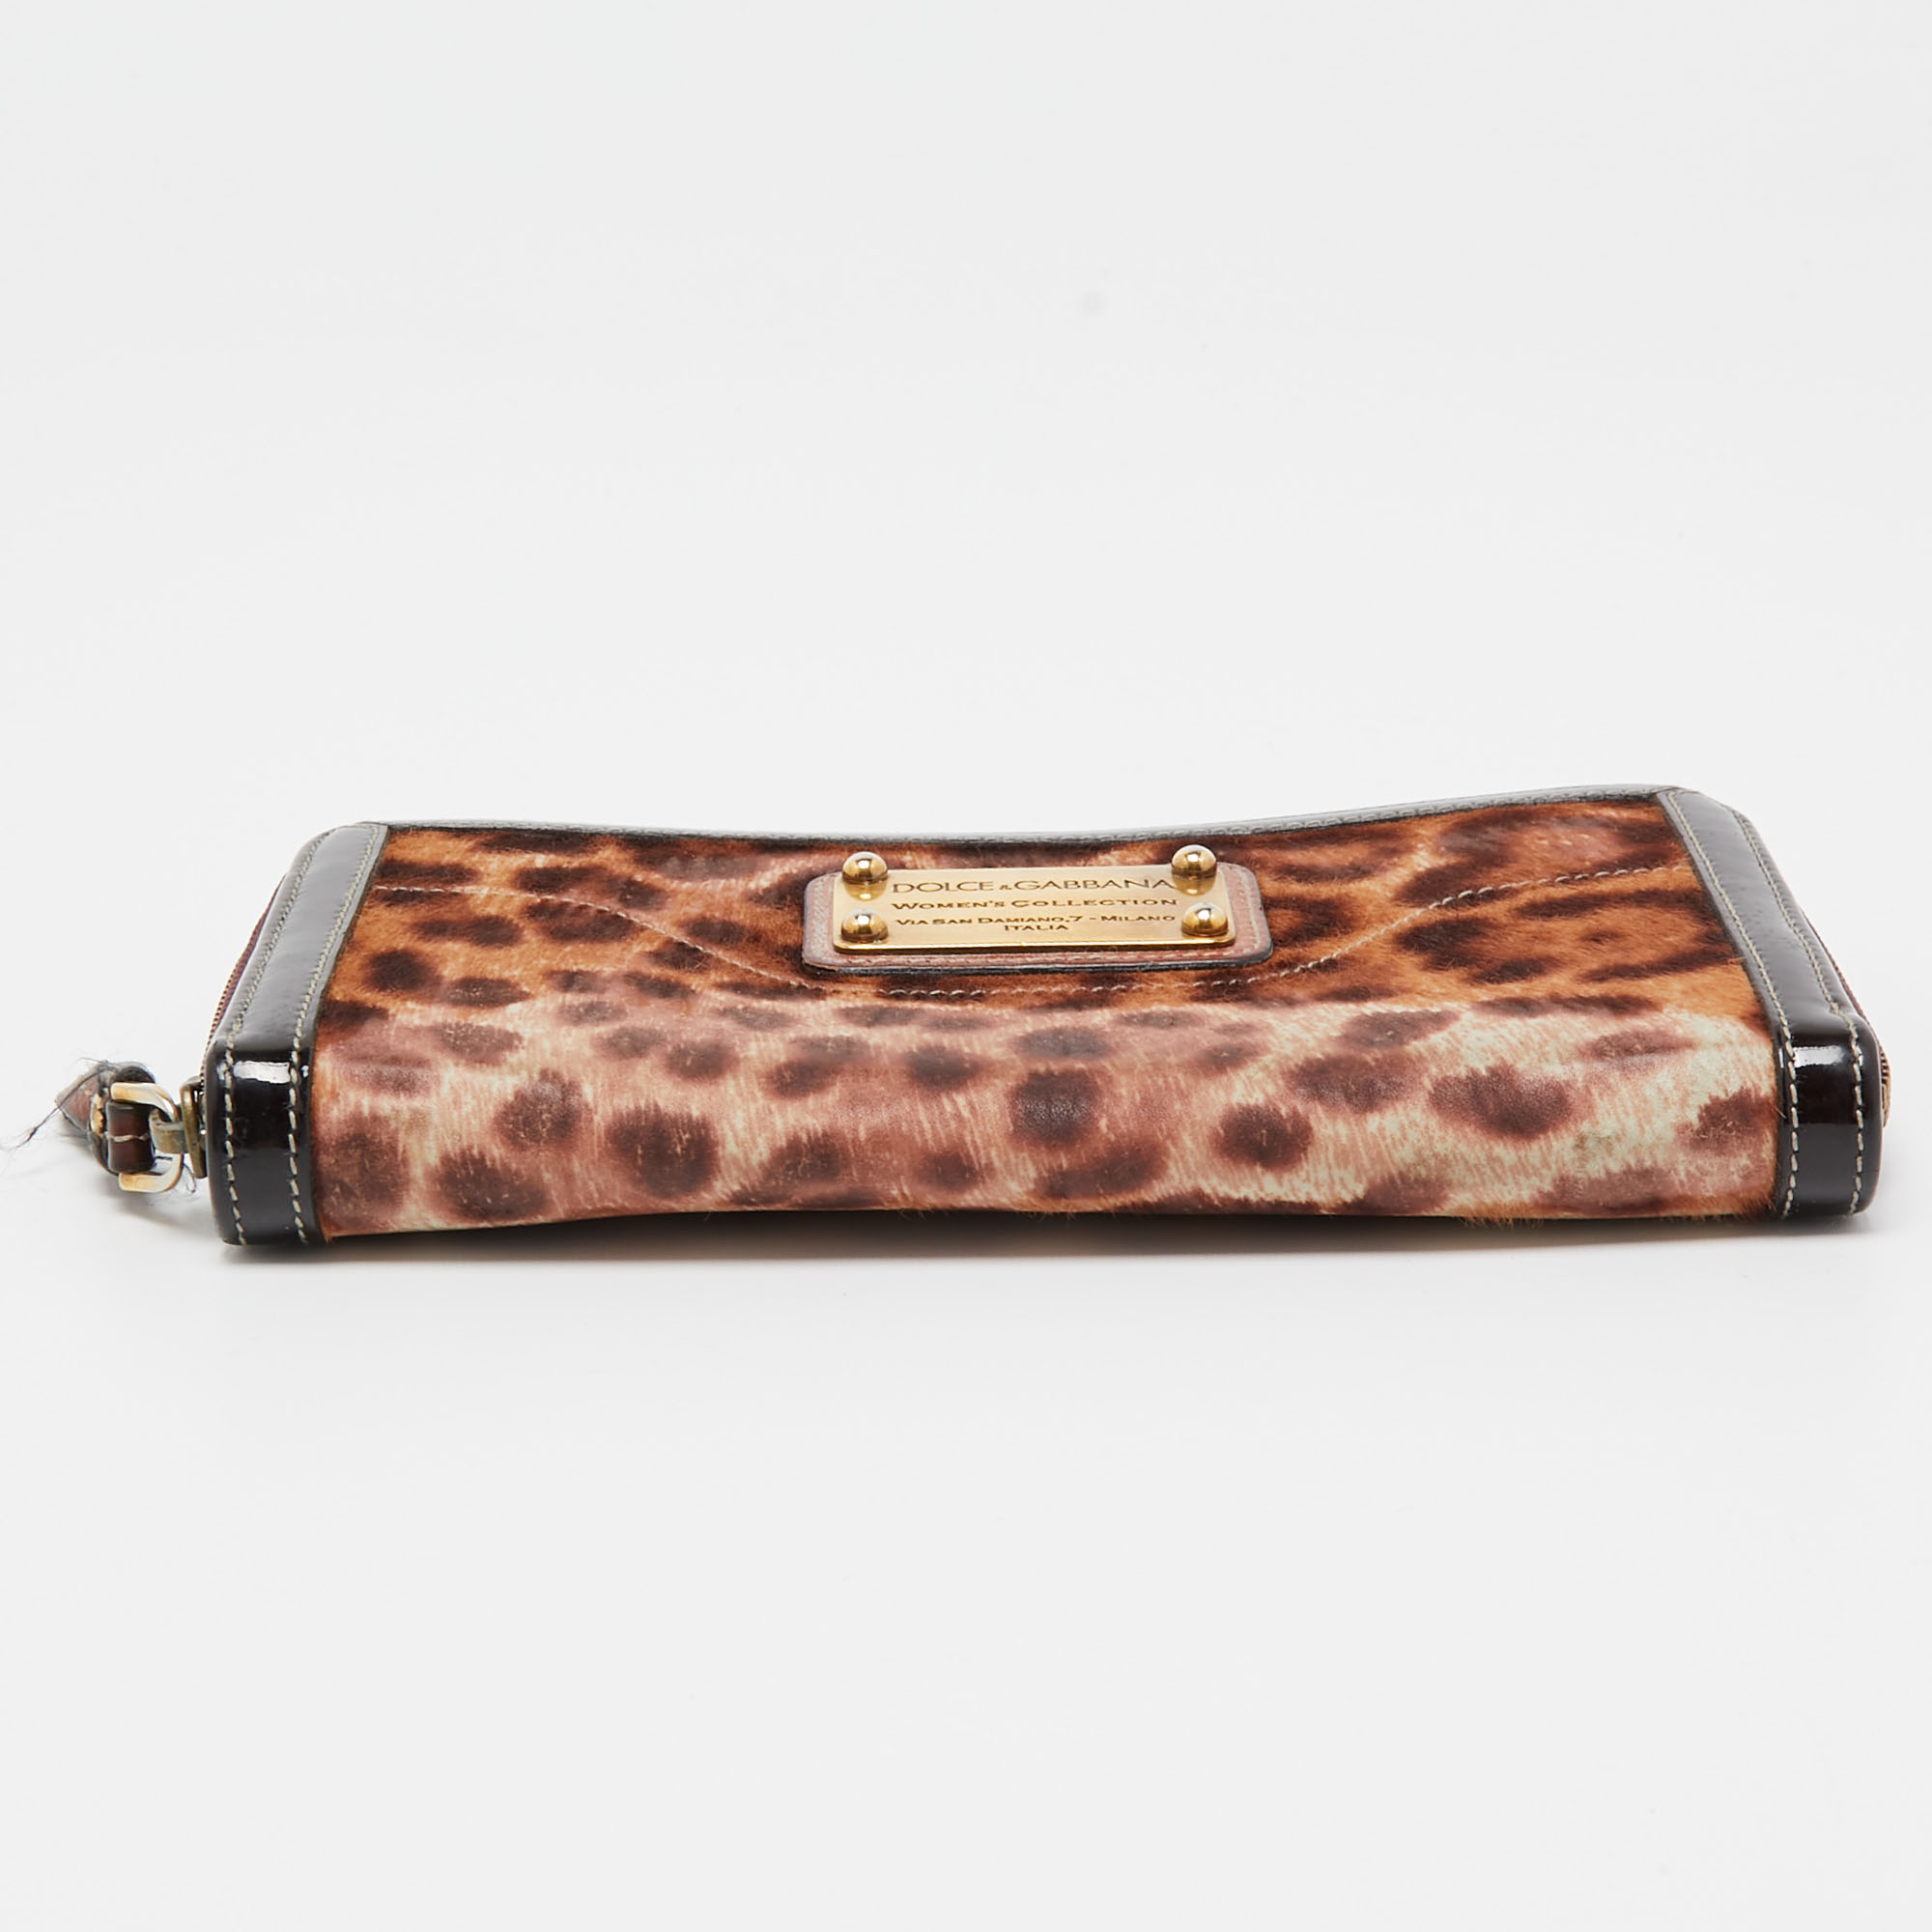 Dolce & Gabbana Brown Leopard Print Calfhair And Patent Leather Zip Around Continental Wallet